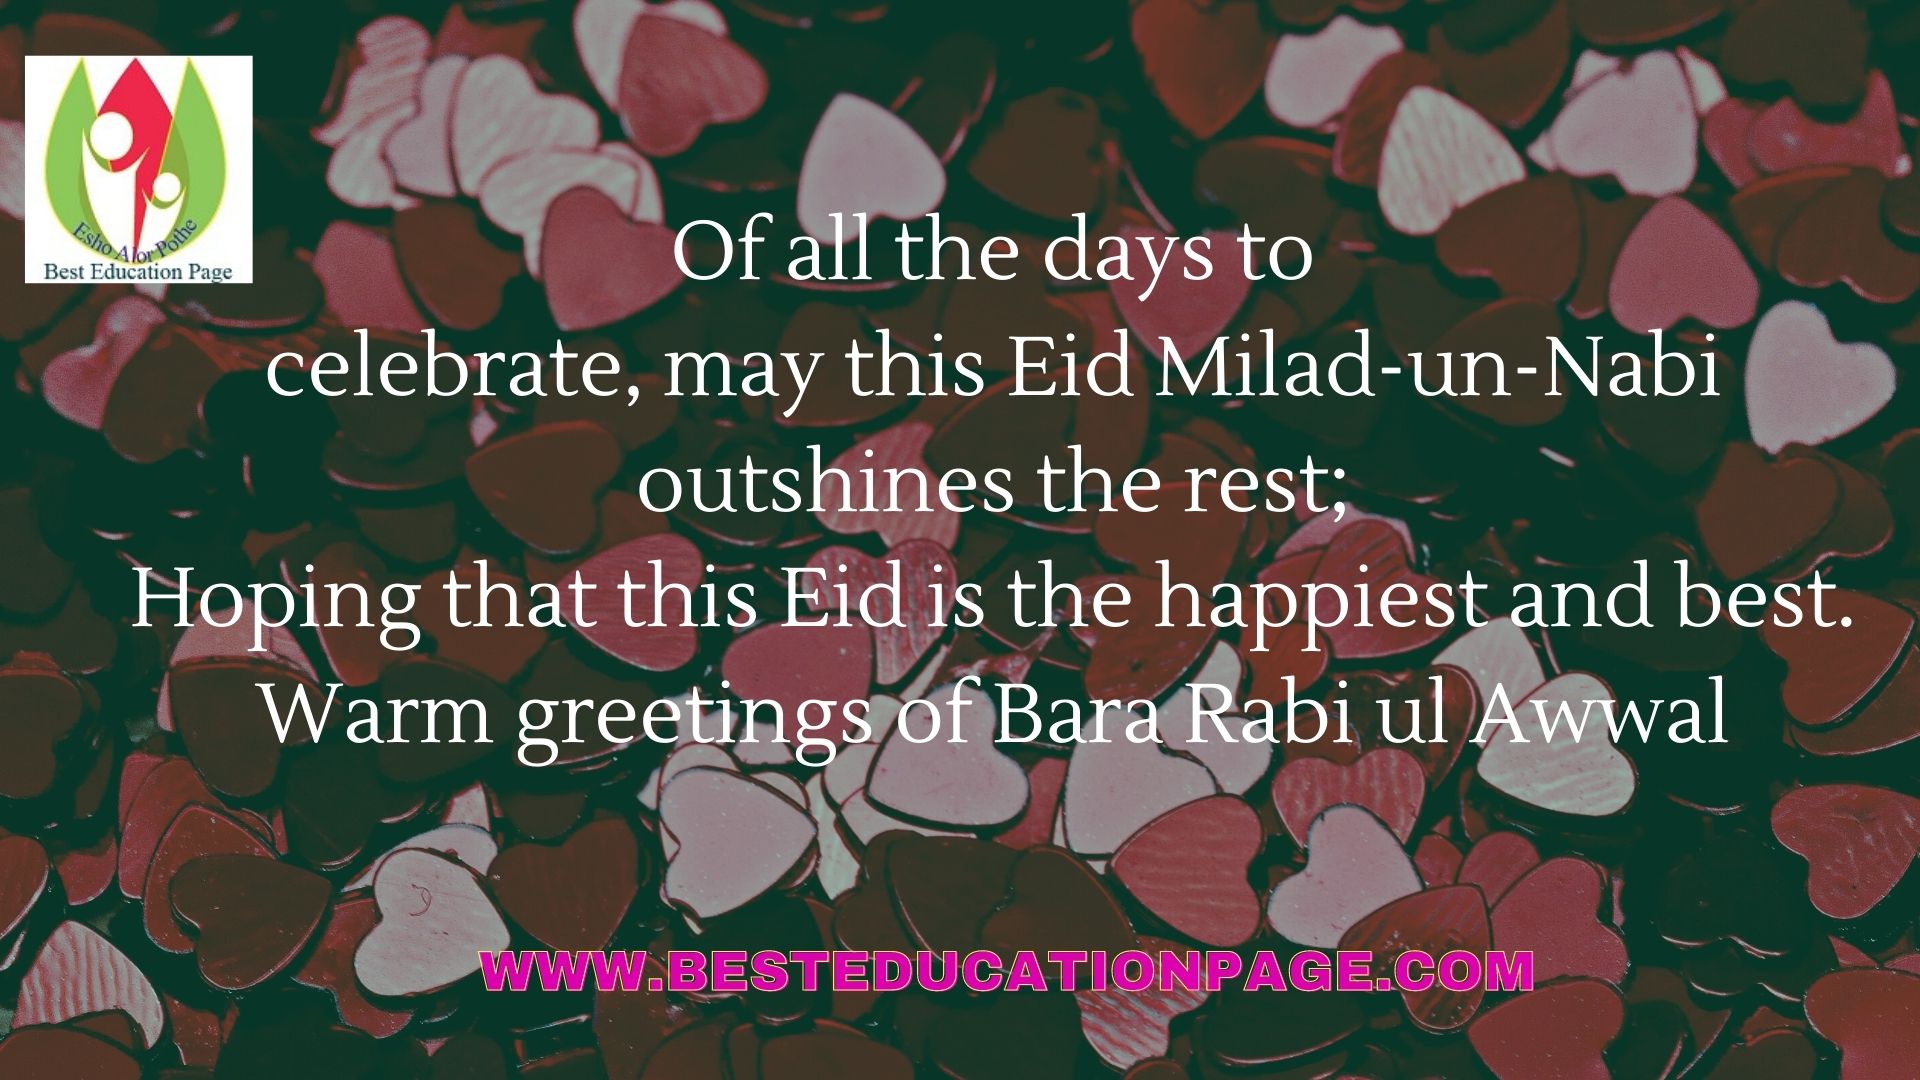 Of all the days to celebrate, may this Eid Milad-un-Nabi outshines   the rest;  Hoping that this Eid is the happiest and best.   Warm greetings of Bara Rabi ul Awwal